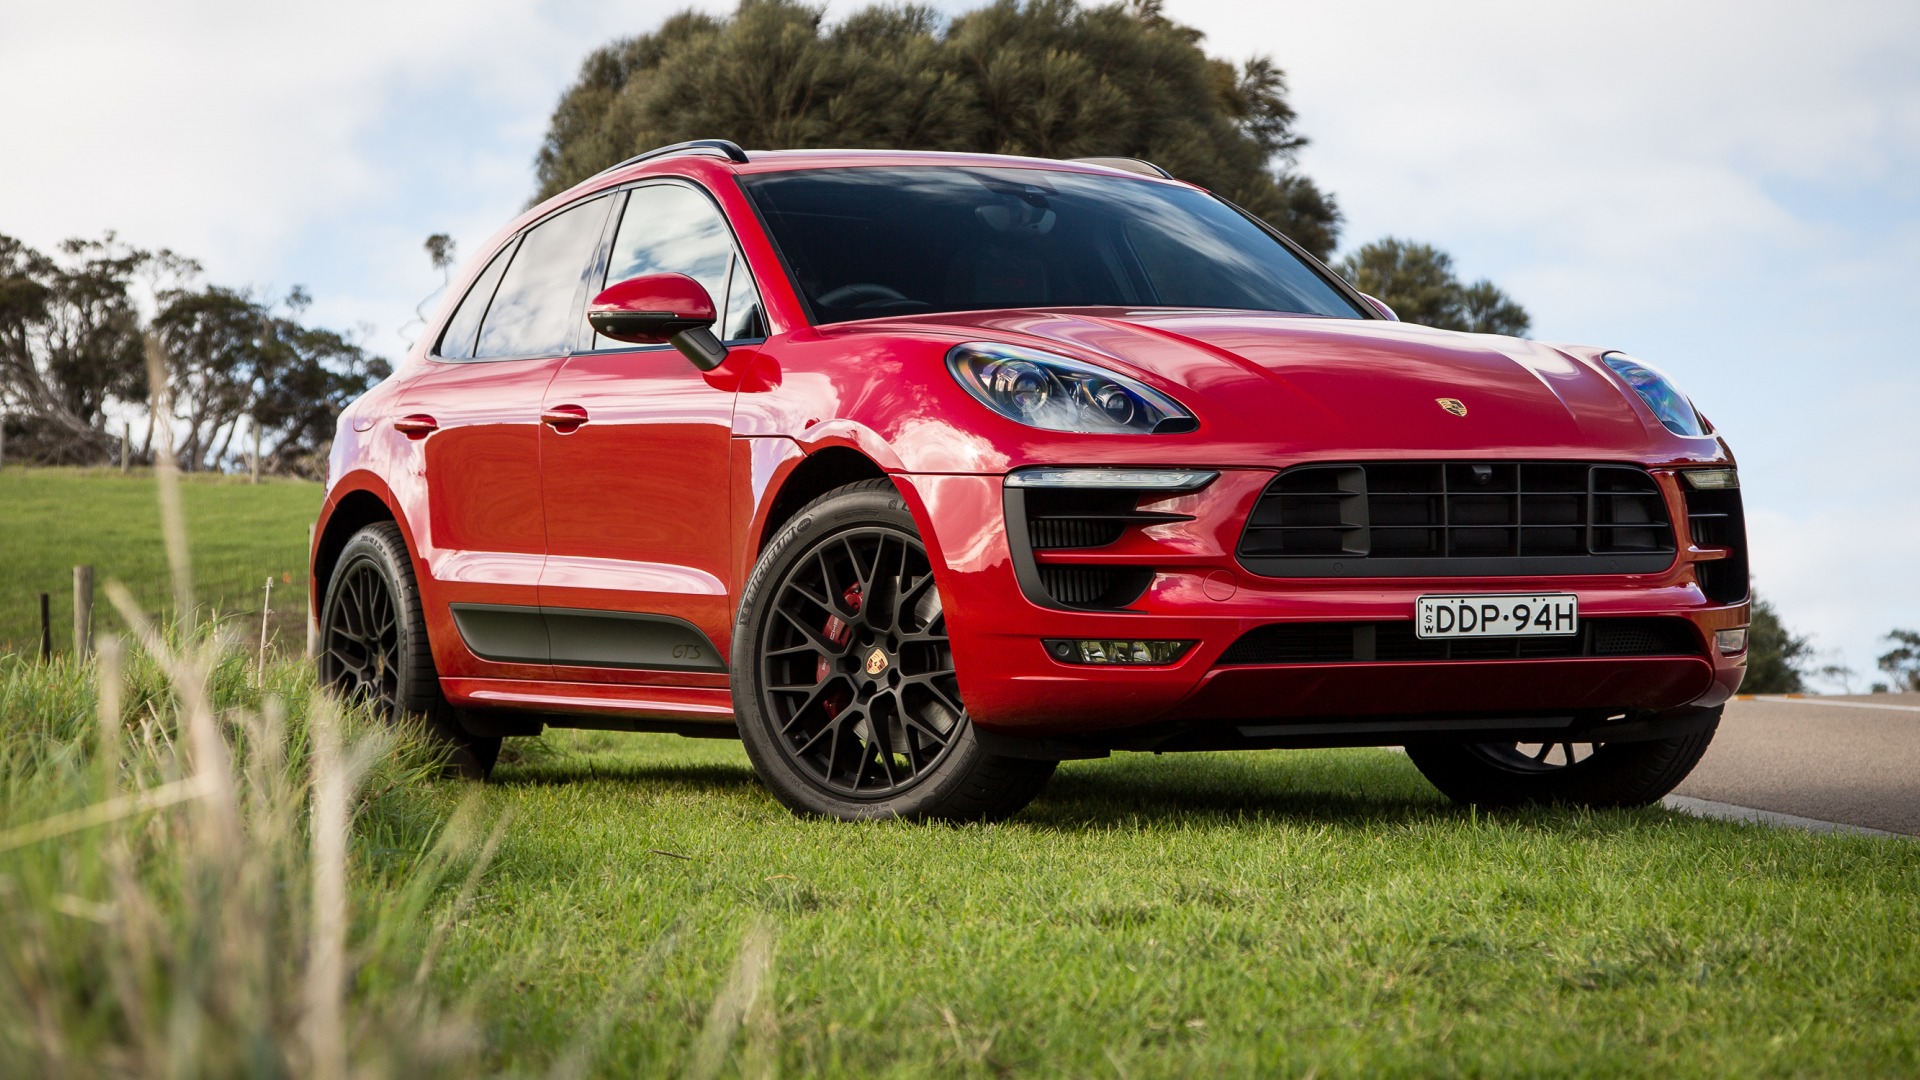 General 1920x1080 red cars numbers grass vehicle Porsche Porsche Cayenne SUV German cars Volkswagen Group car frontal view licence plates headlights trees sky overcast clouds